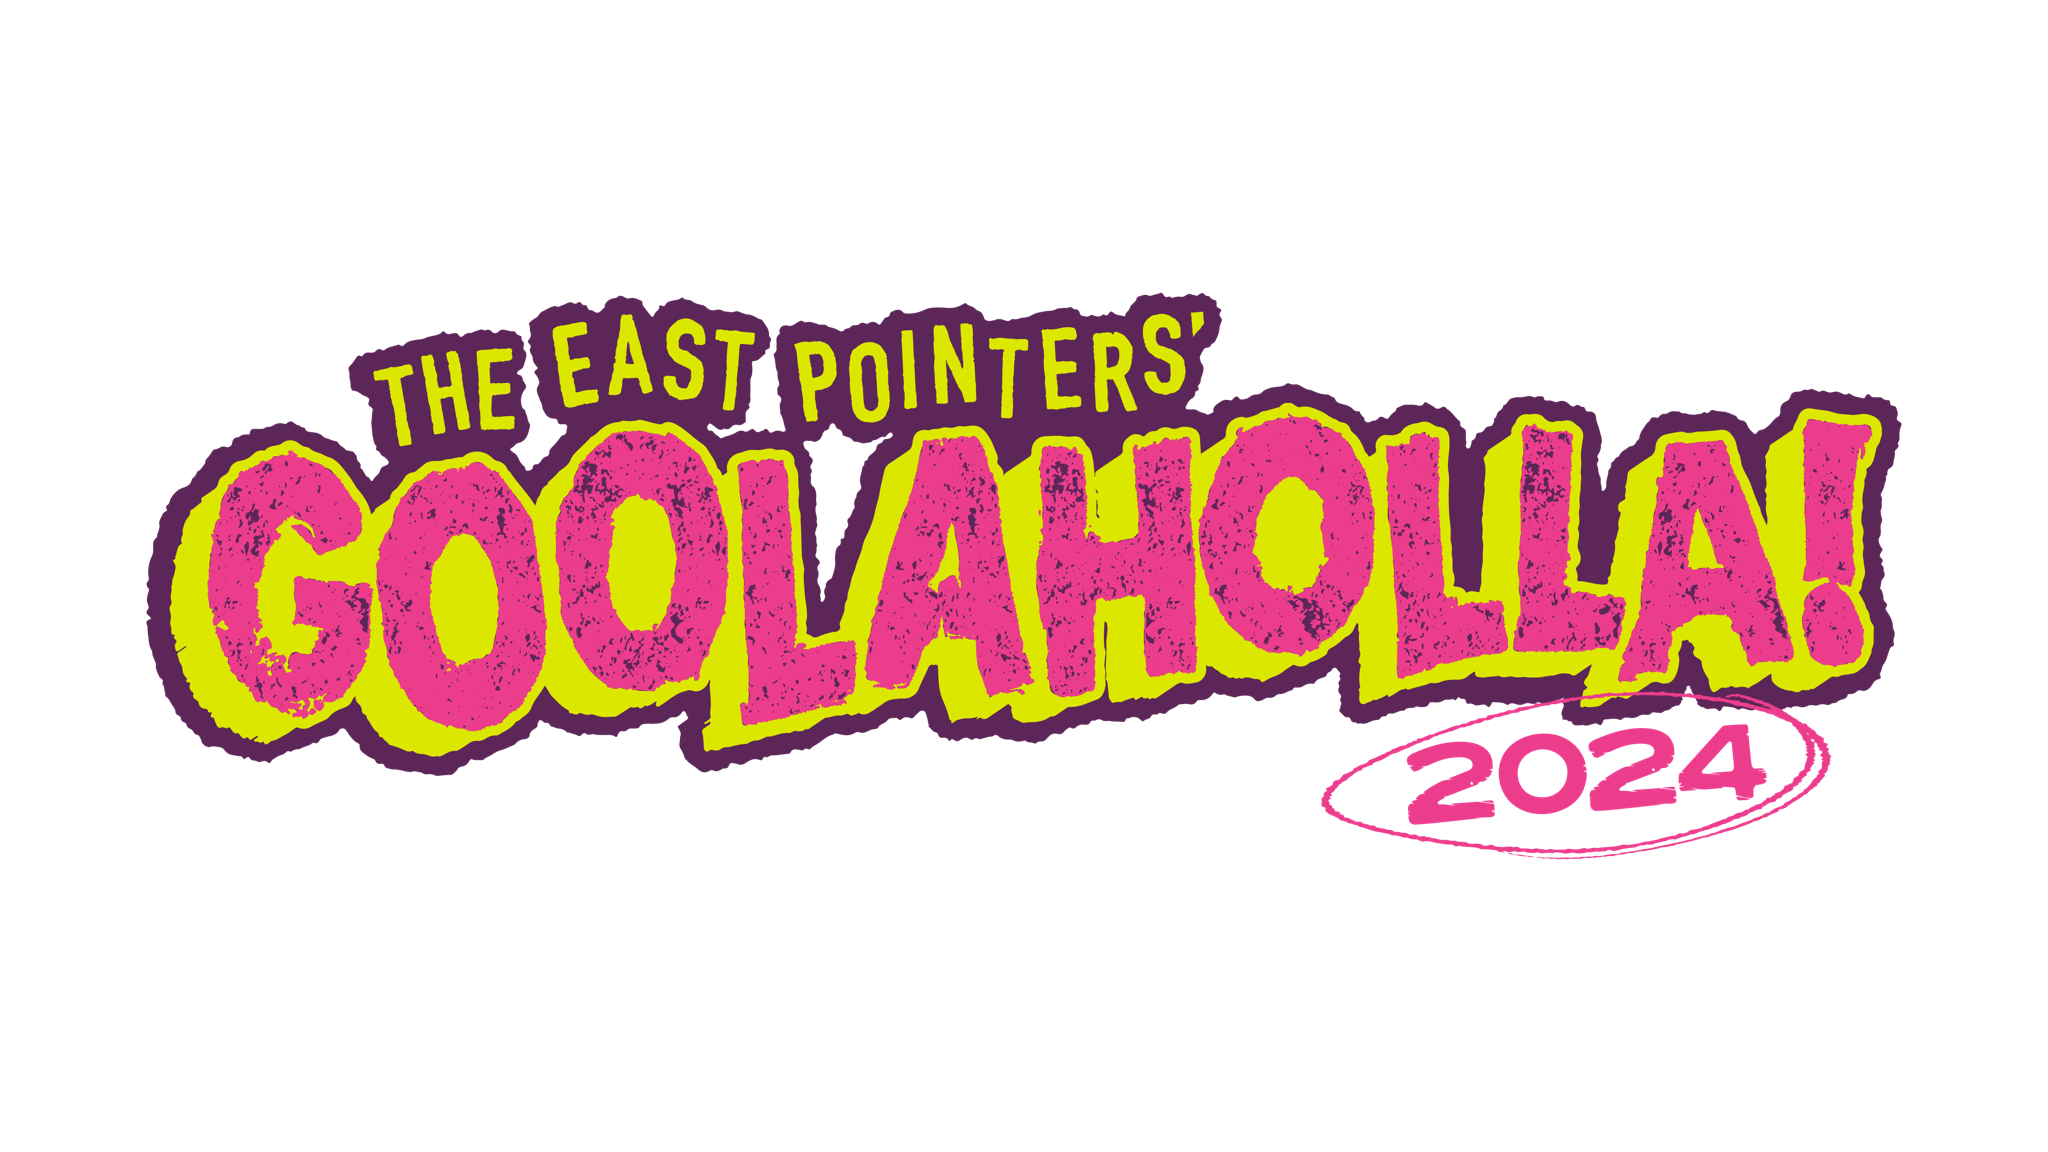 The East Pointers' Goolaholla! 2024